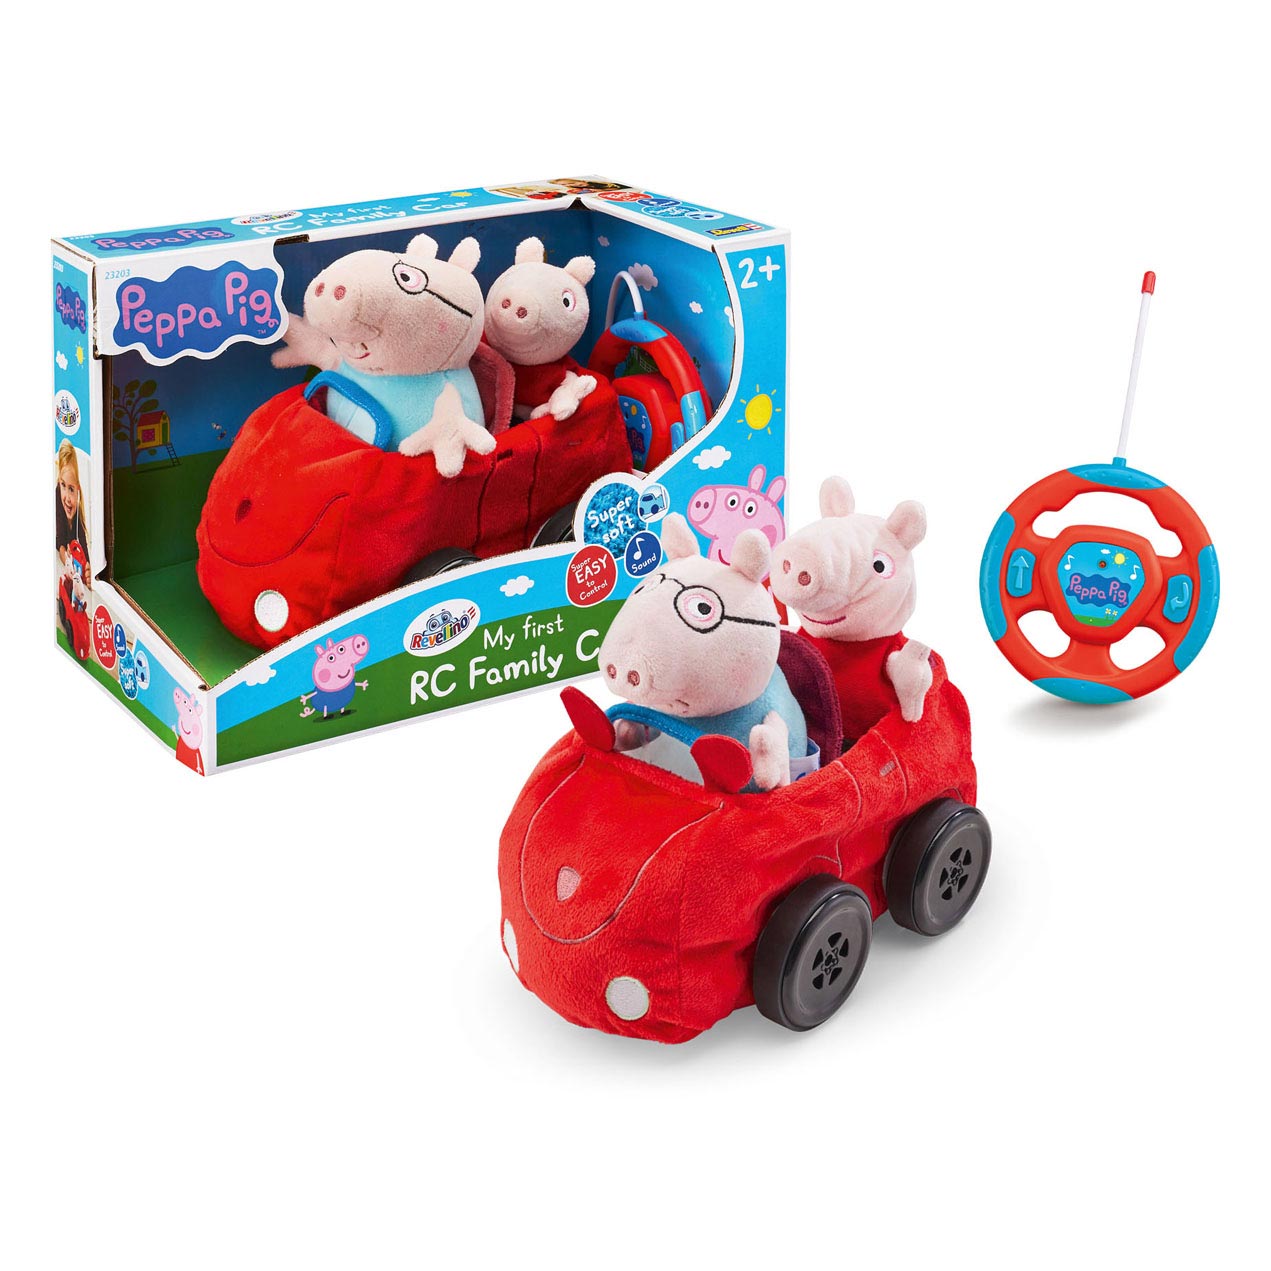 Revell Ma première voiture RC - Peppa Pig